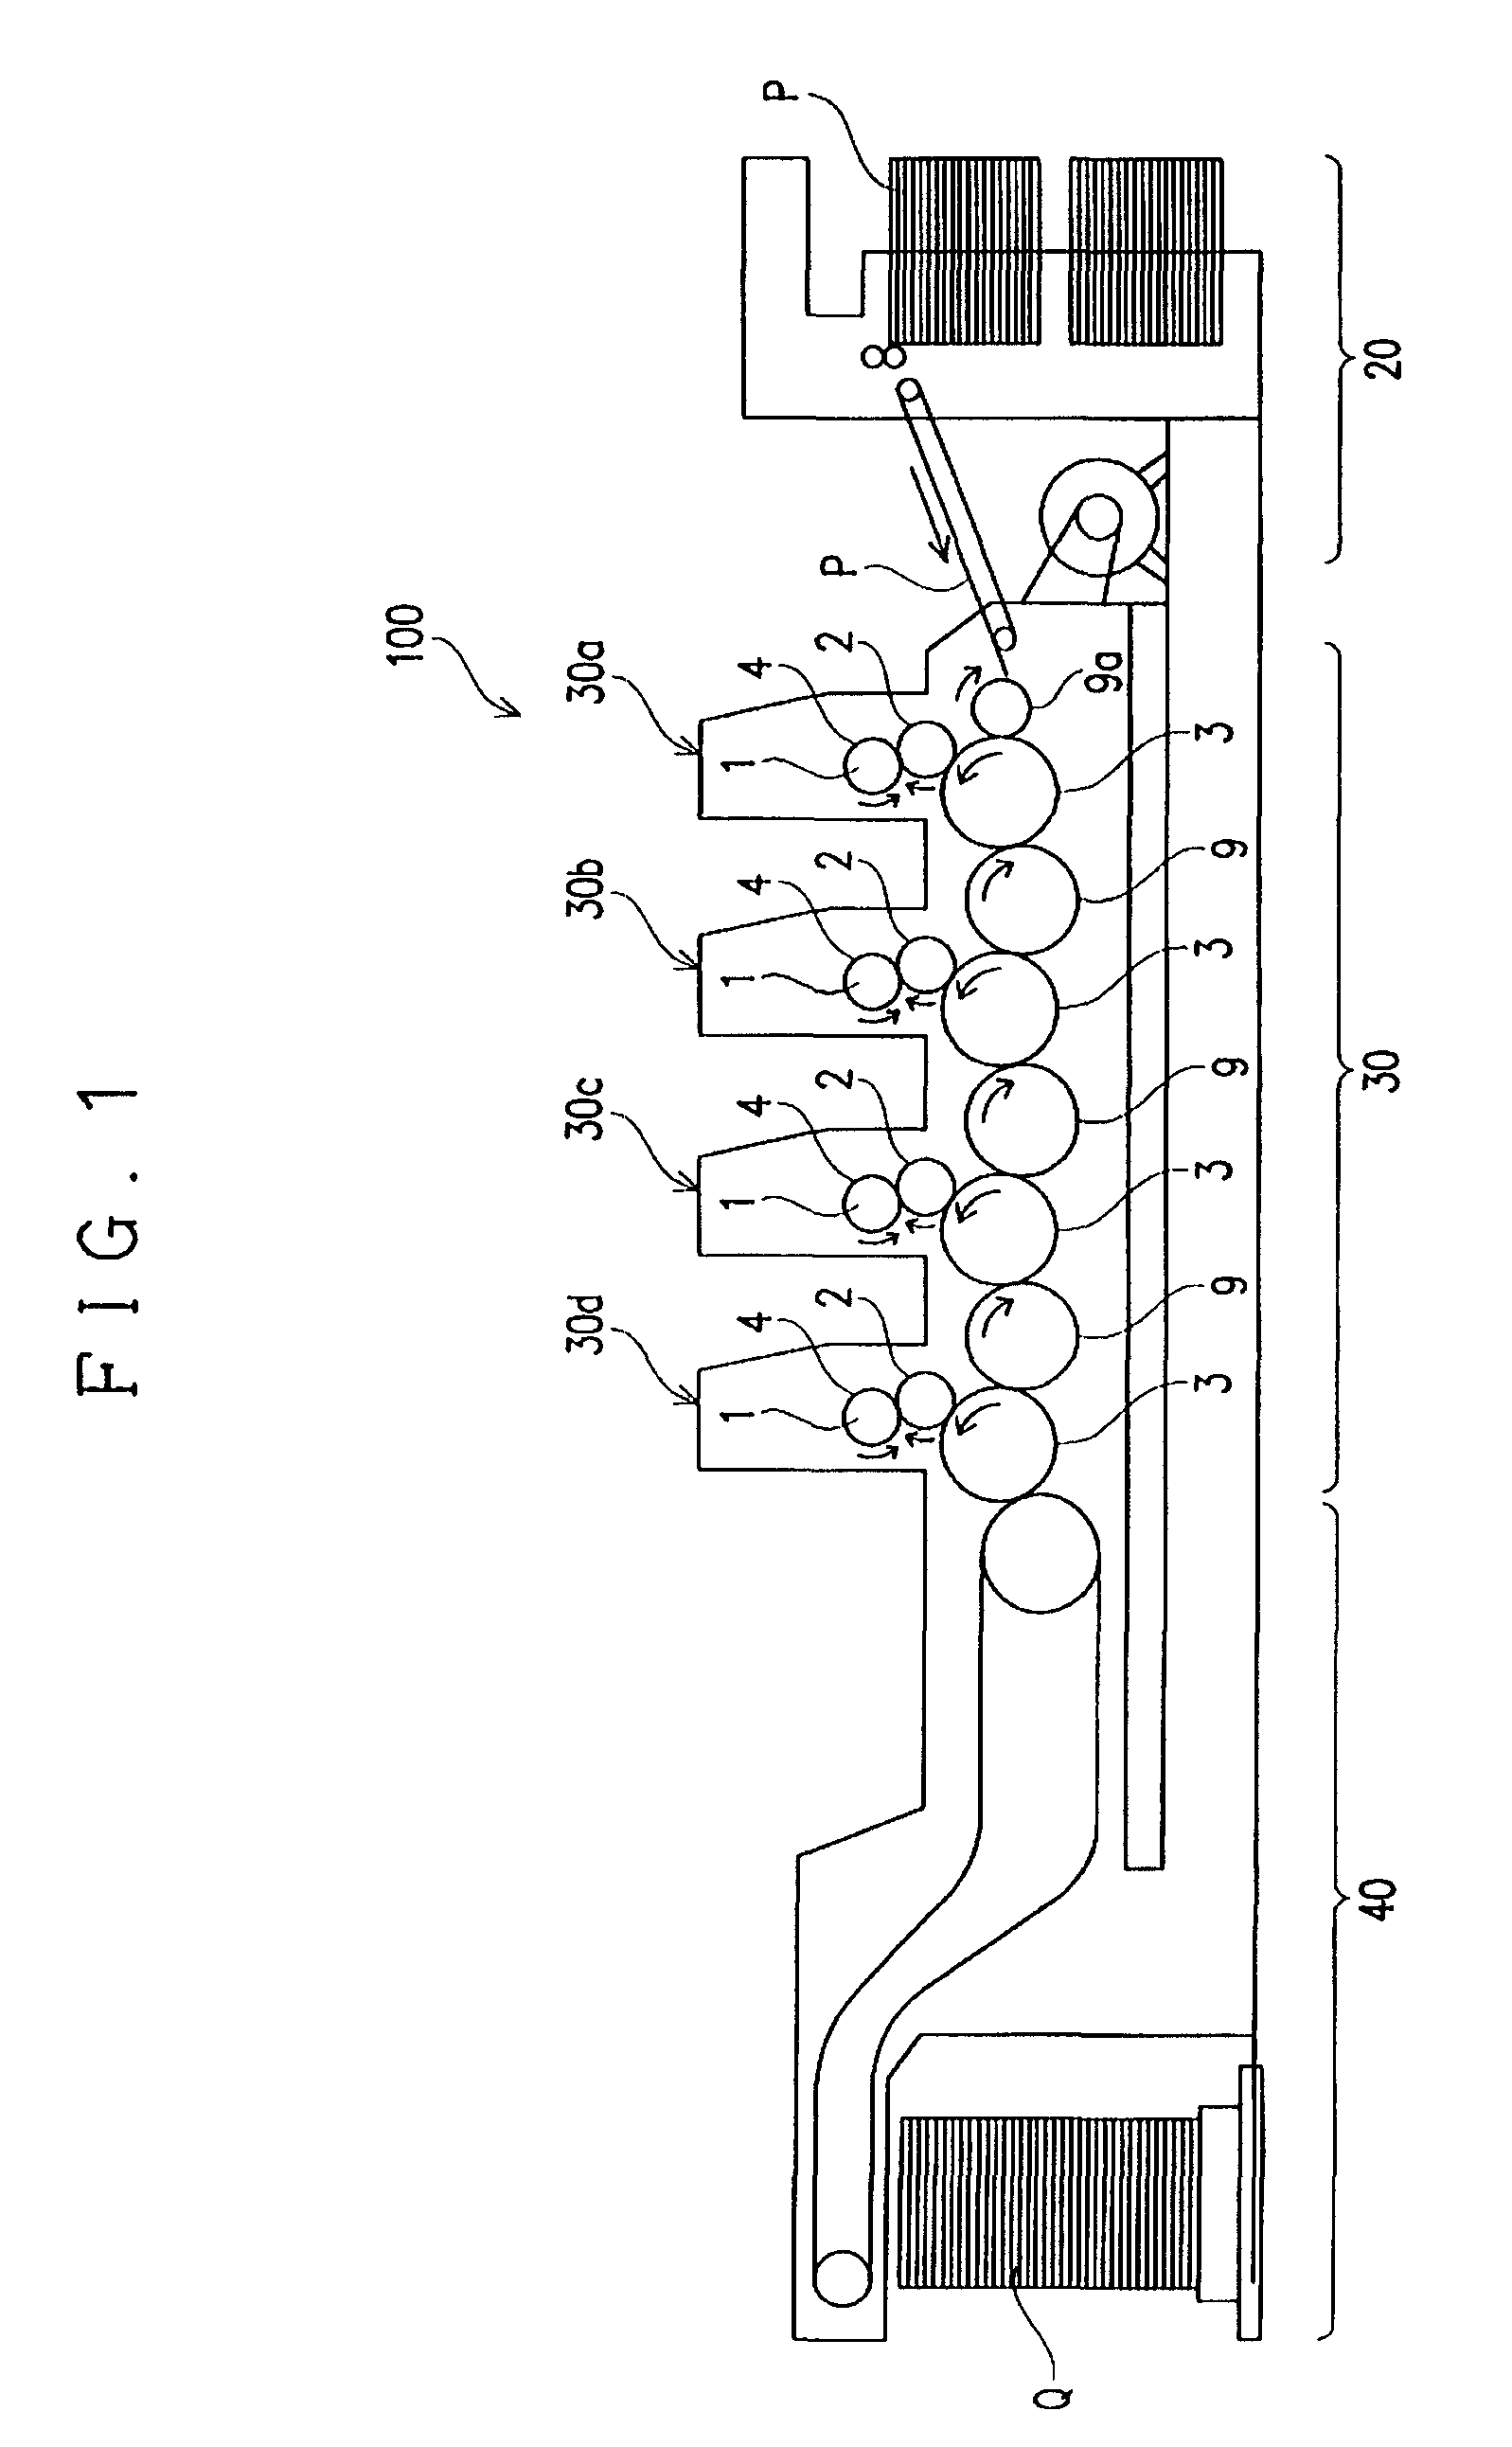 Method and apparatus of controlling quality of printed image for color printing press